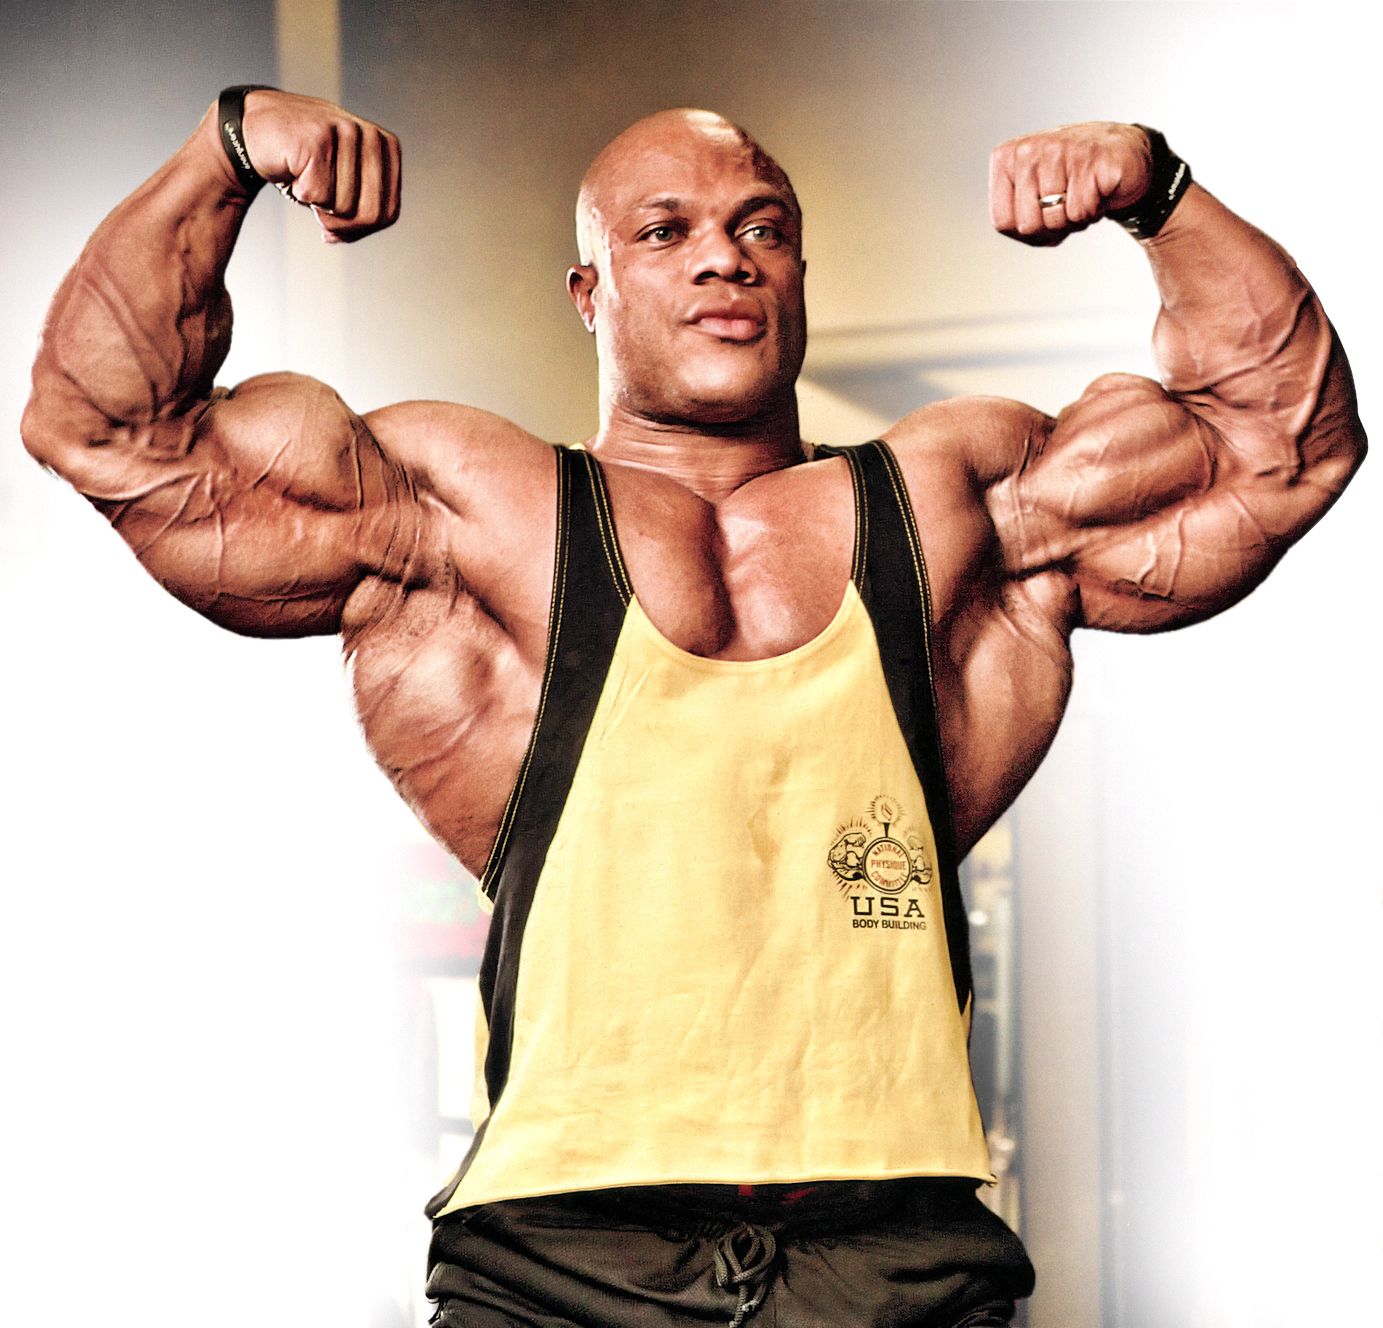 Phil Heath mr Olympia, HD Wallpapers 2013 All About HD Backgrounds